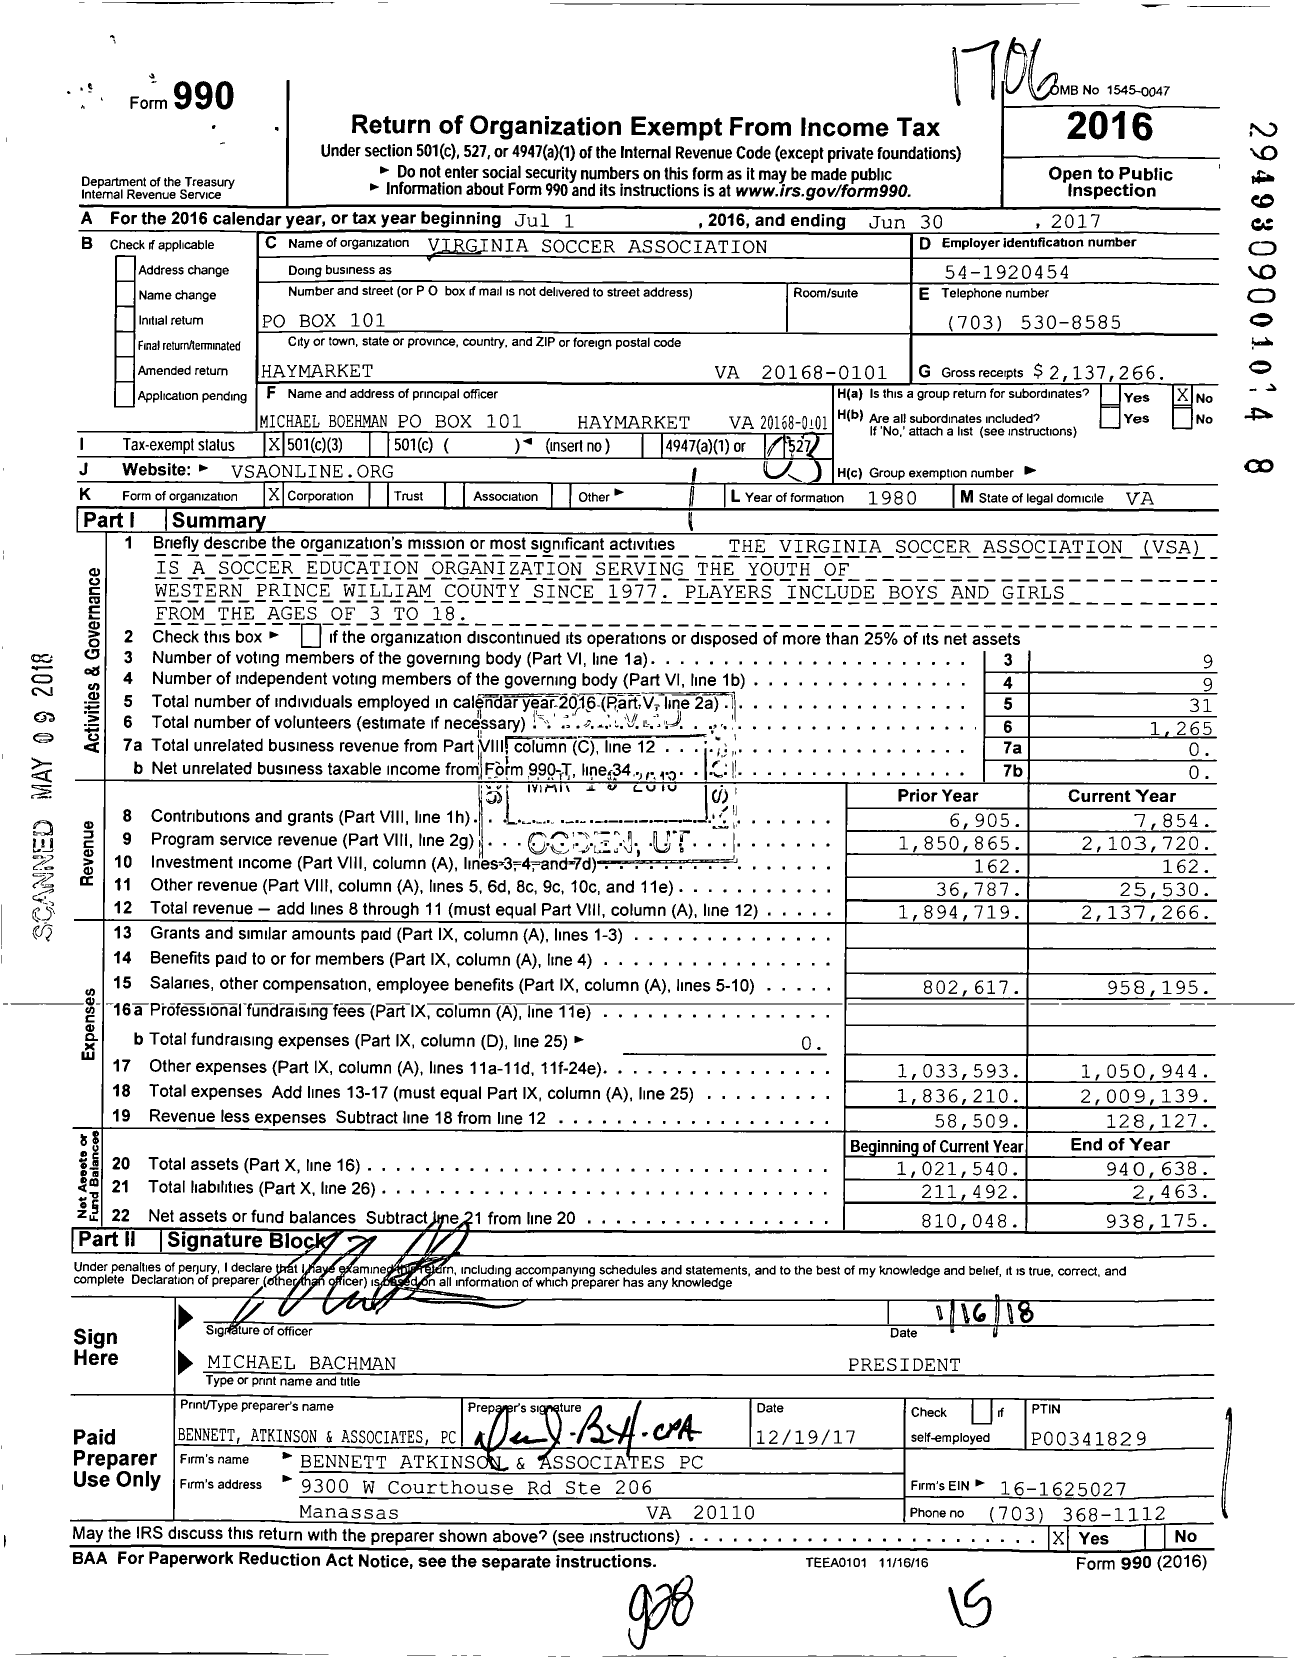 Image of first page of 2016 Form 990 for Virginia Soccer Association